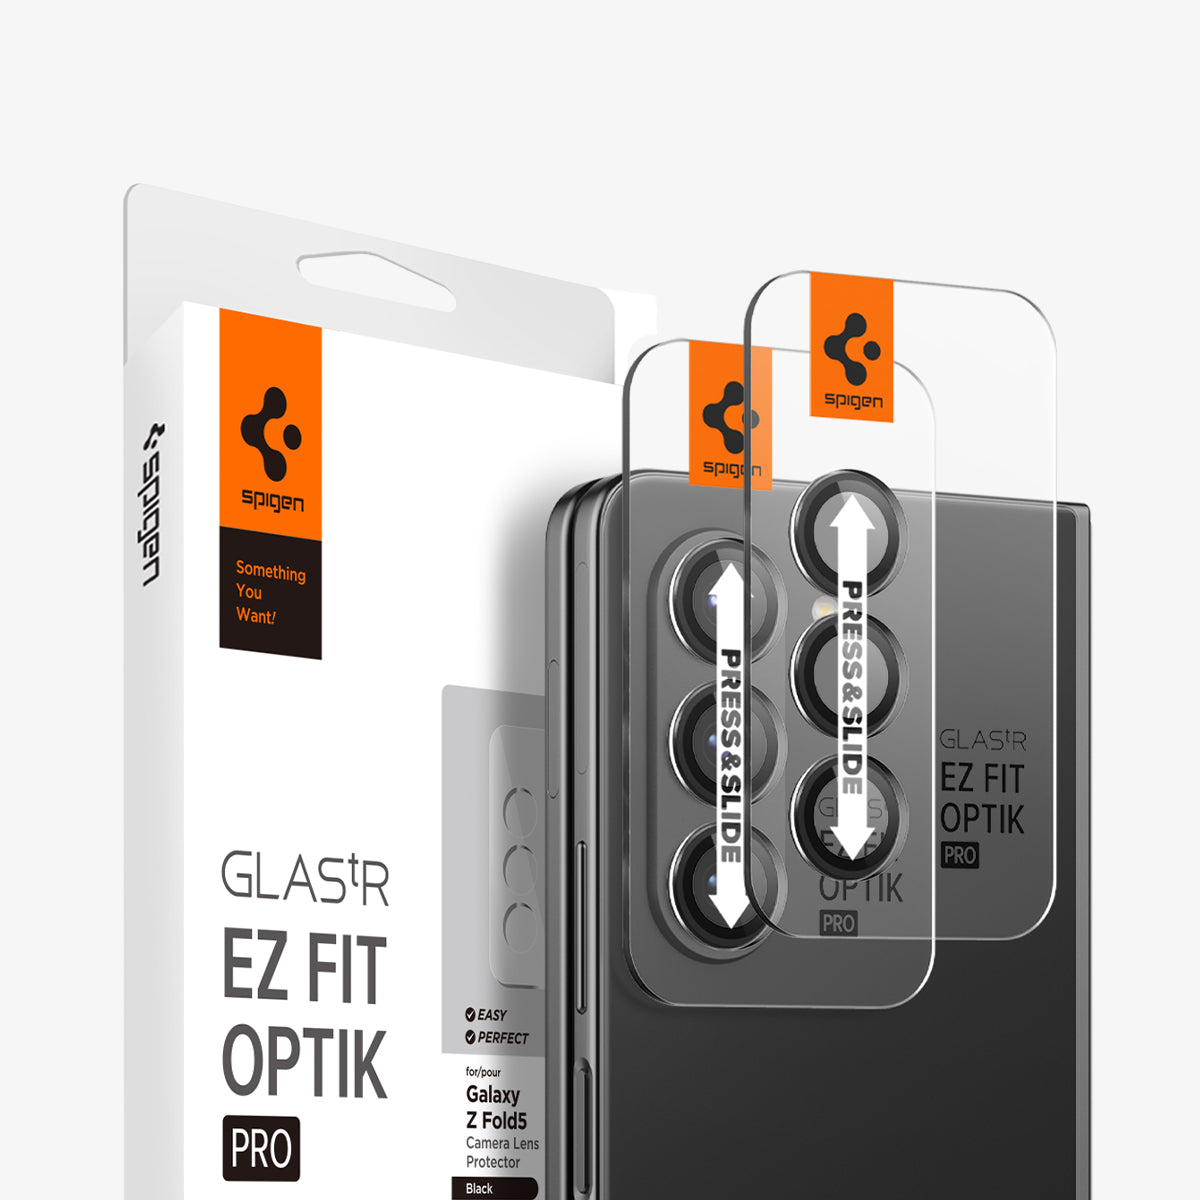 AGL06524 - Galaxy Z Fold 5 Series Optik Pro Lens Protector showing the device, two lens protectors and packaging